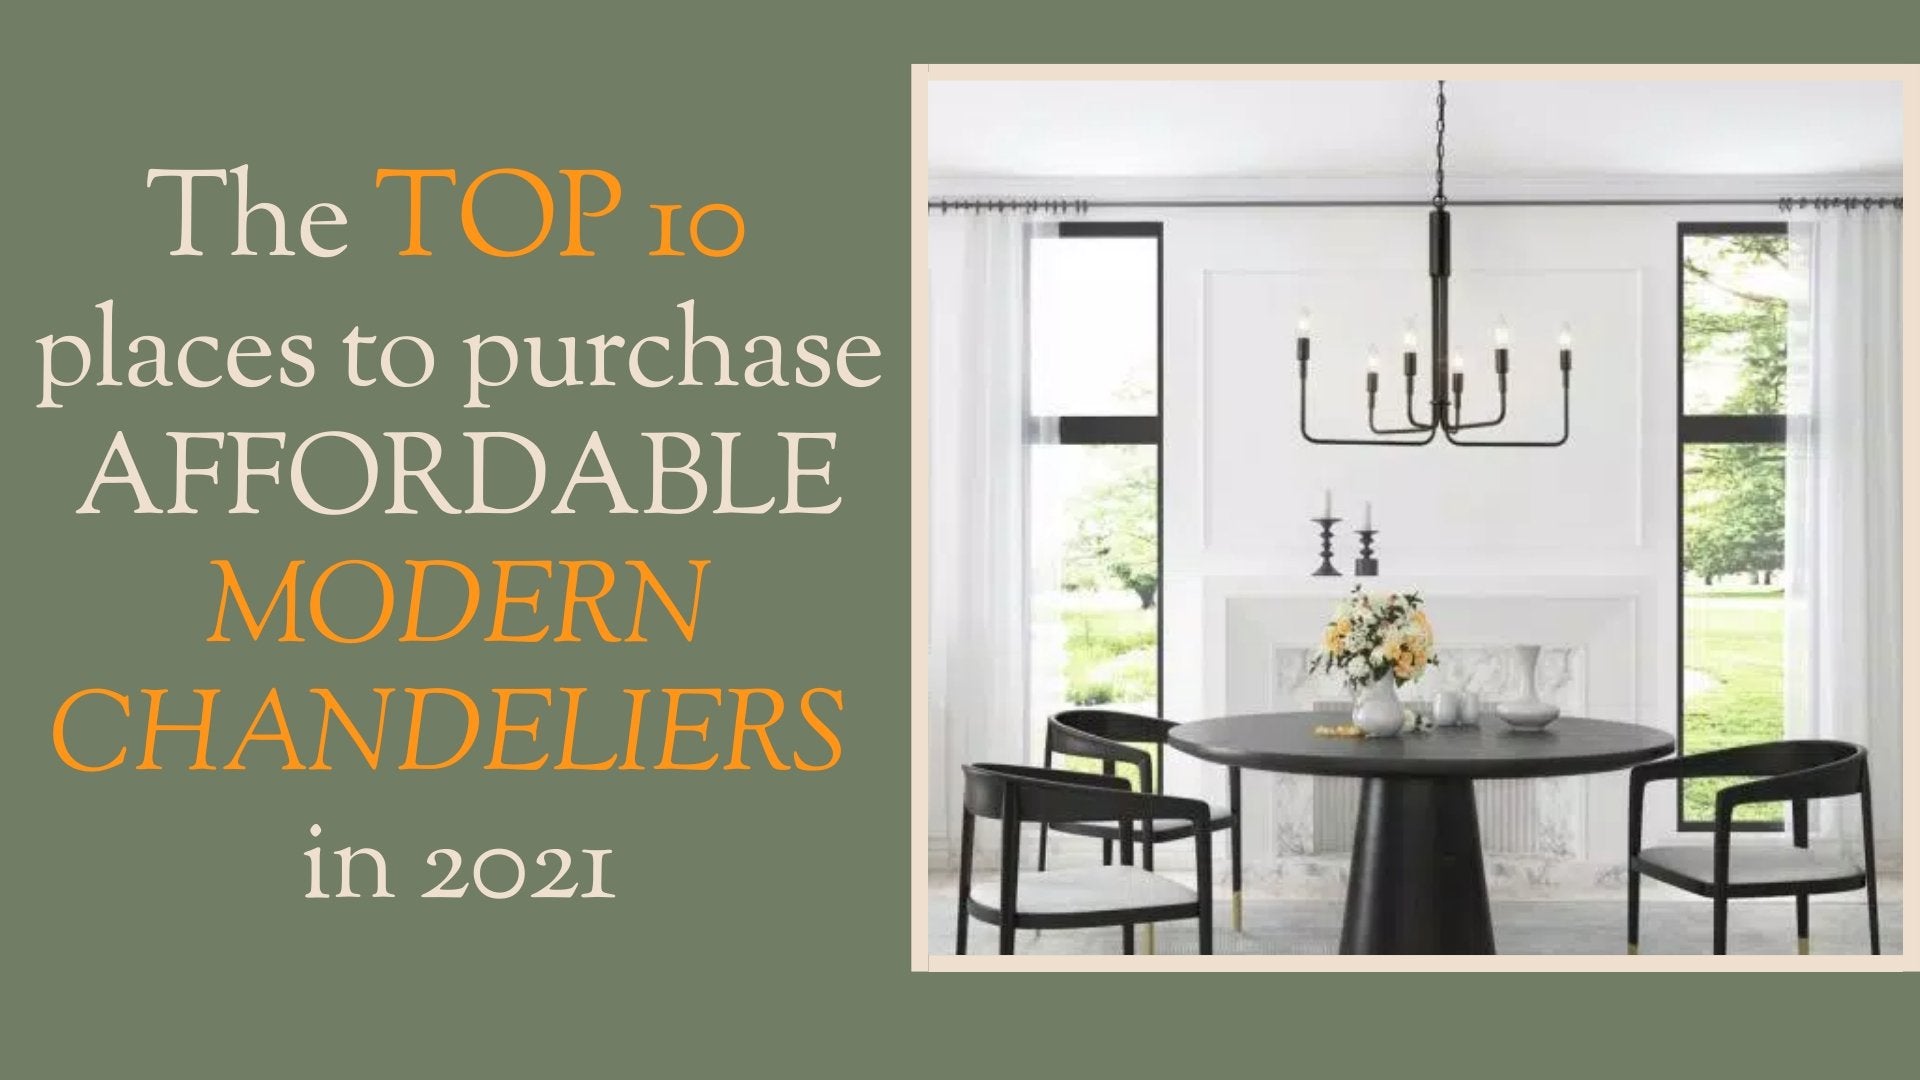 http://magtrim.com/cdn/shop/articles/the-top-10-places-to-purchase-affordable-modern-chandeliers-in-2021-627286.jpg?v=1649207420